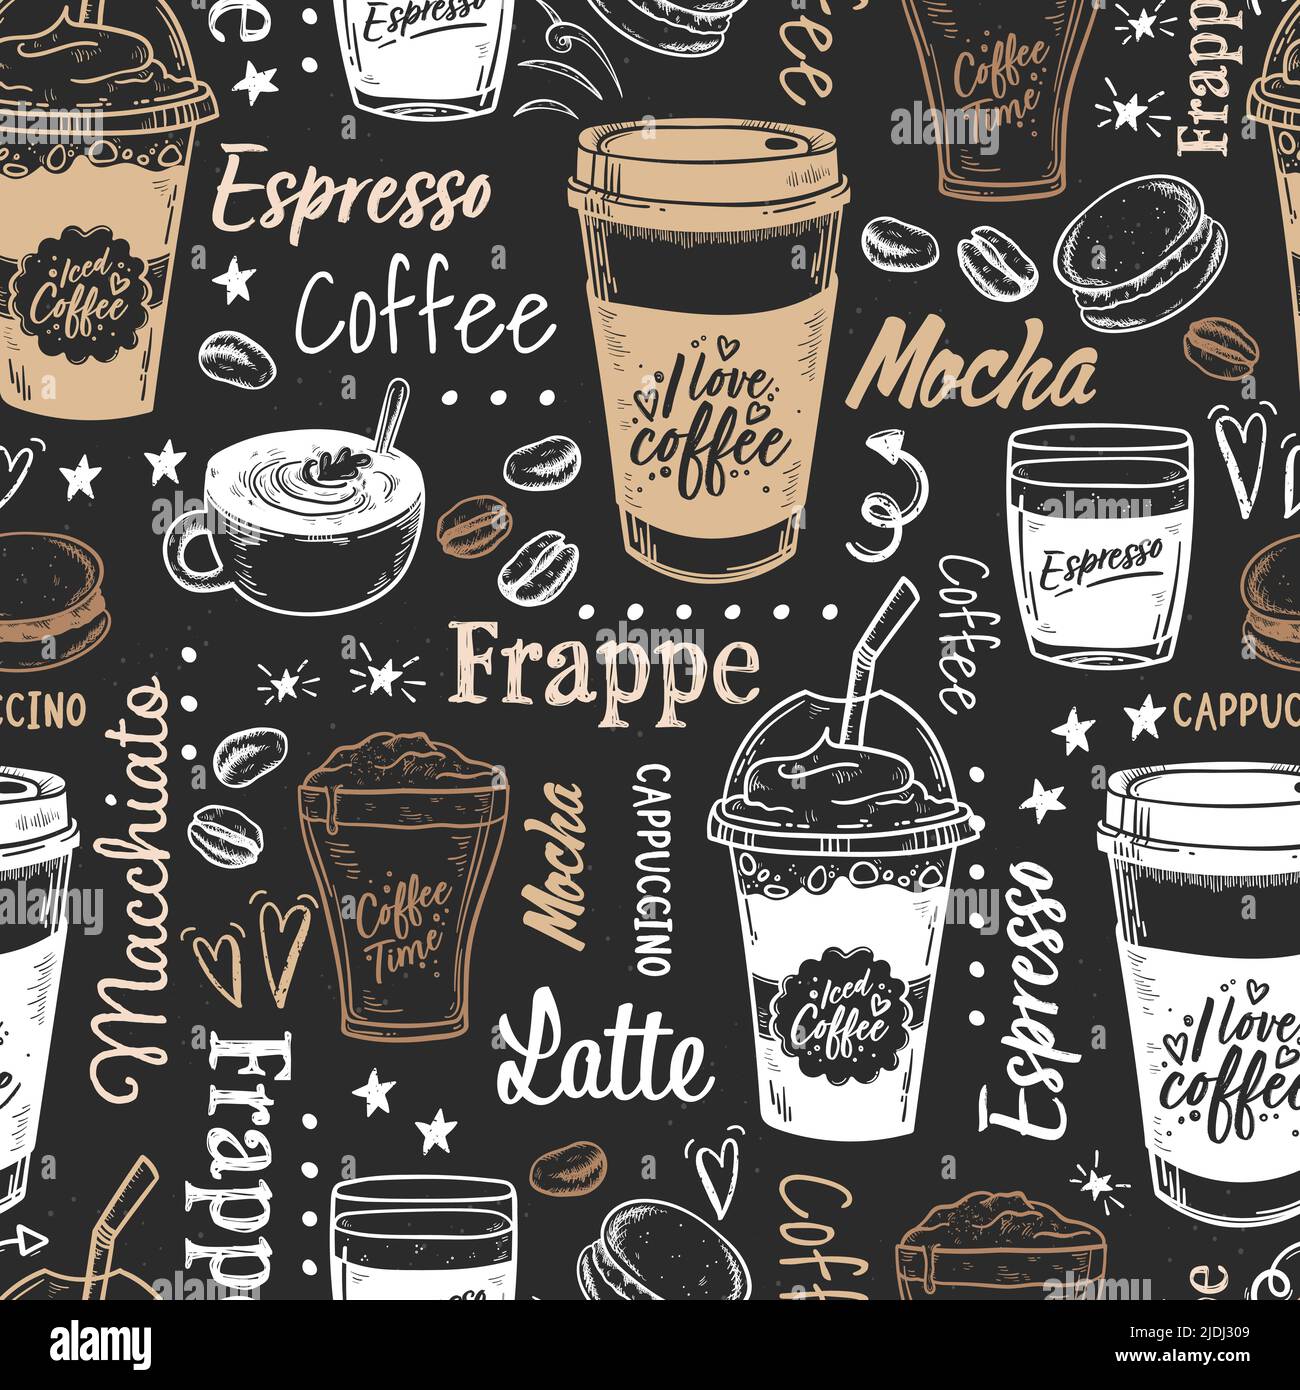 https://c8.alamy.com/comp/2JDJ309/lovely-hand-drawn-coffee-seamless-pattern-cute-doodle-background-great-for-banners-wallpapers-wrapping-fabrics-vector-design-2JDJ309.jpg